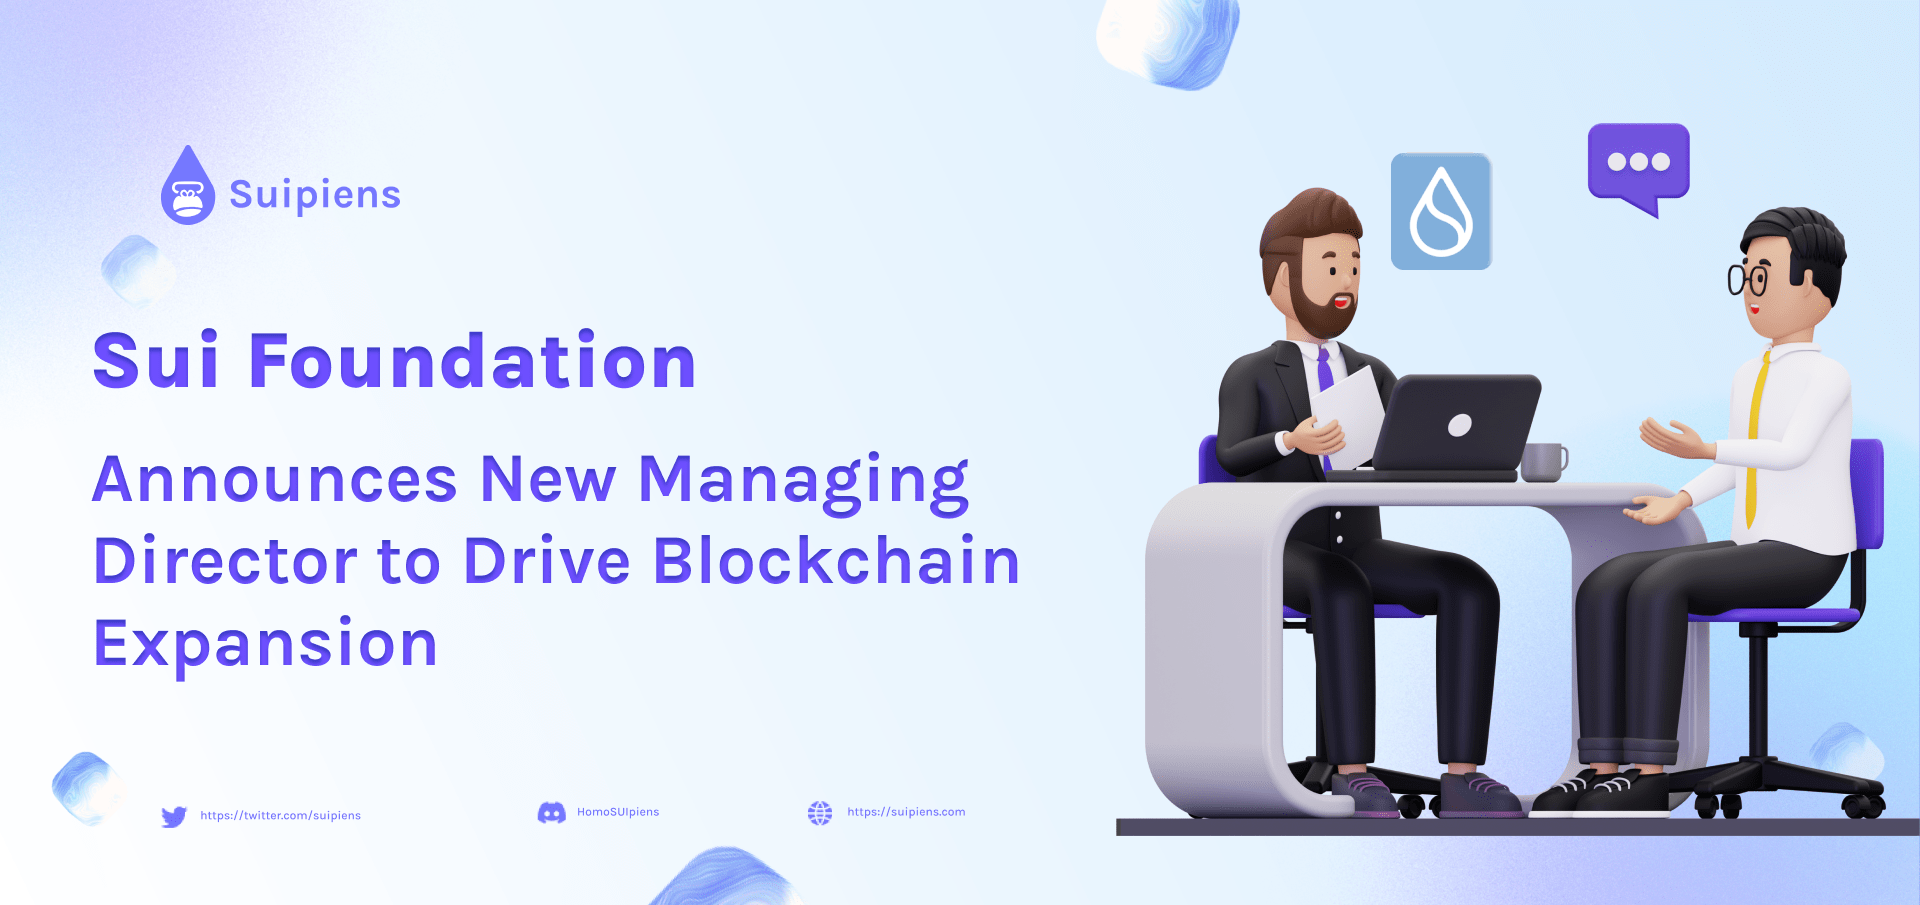 Sui Foundation Announces New Managing Director to Drive Blockchain Expansion